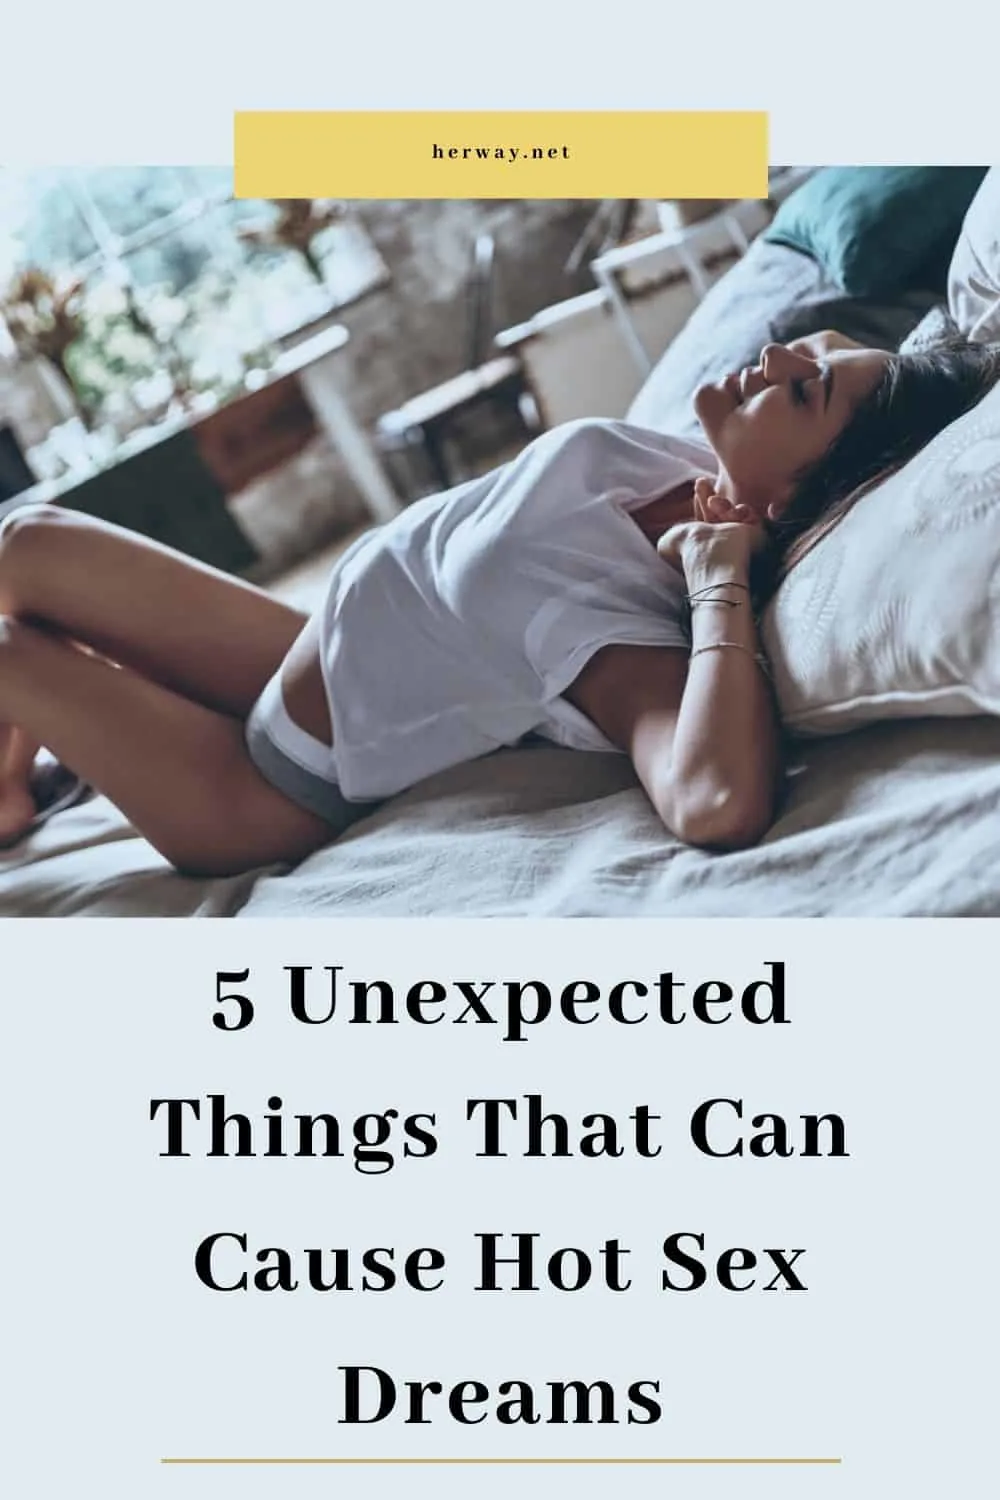 5 Unexpected Things That Can Cause Hot Sex Dreams